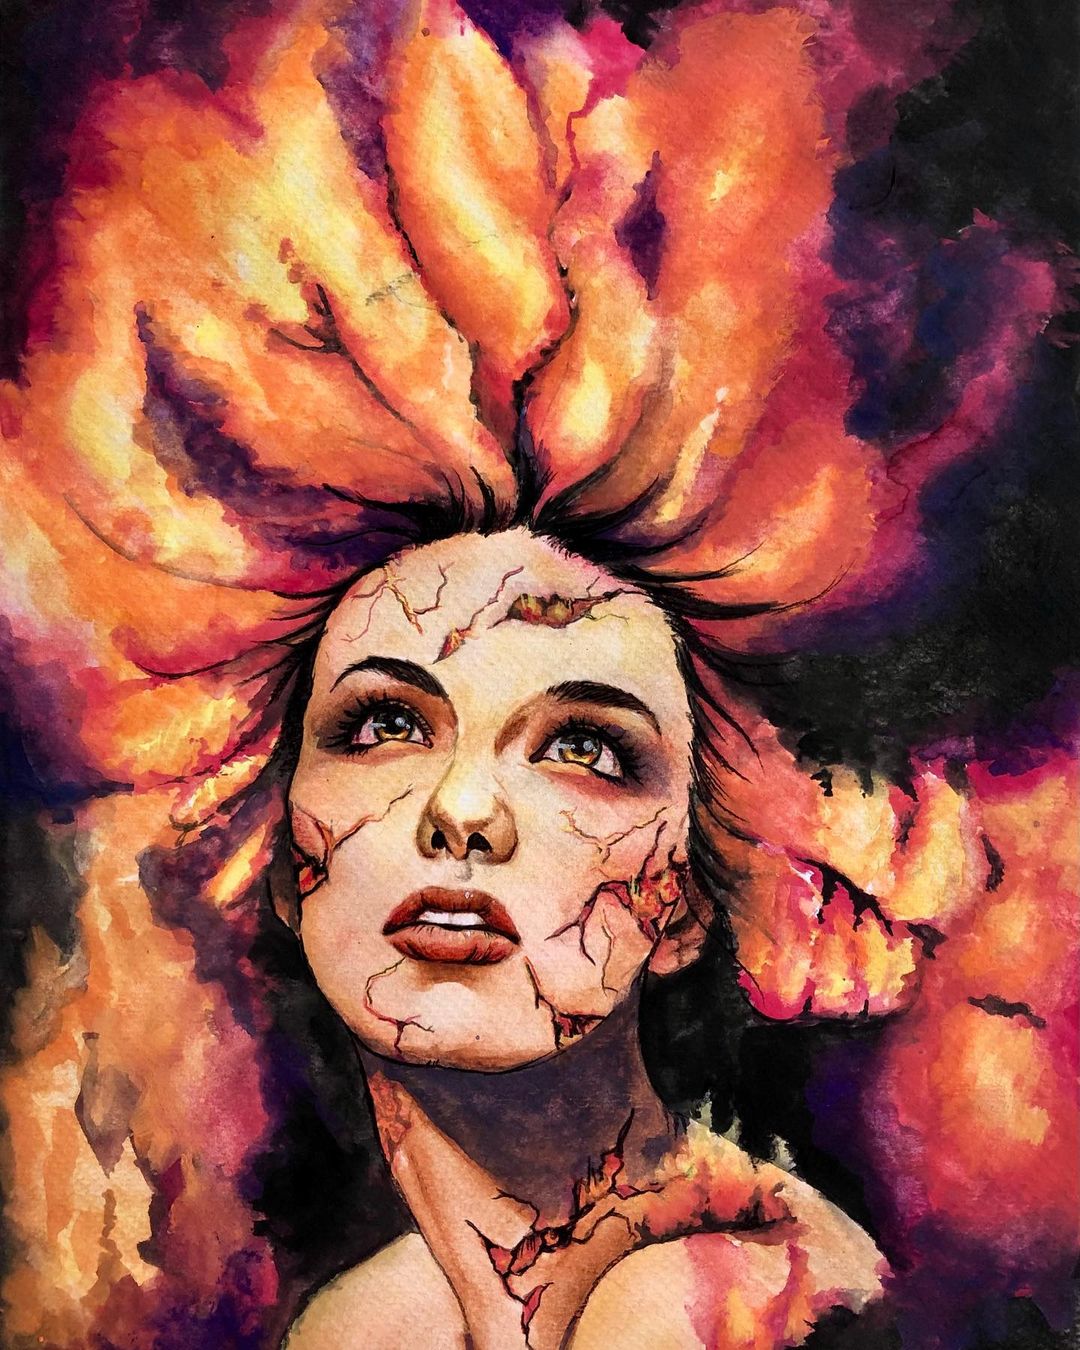 Portrait of a person with long, flaming locks and porcelain-like cracks in their skin